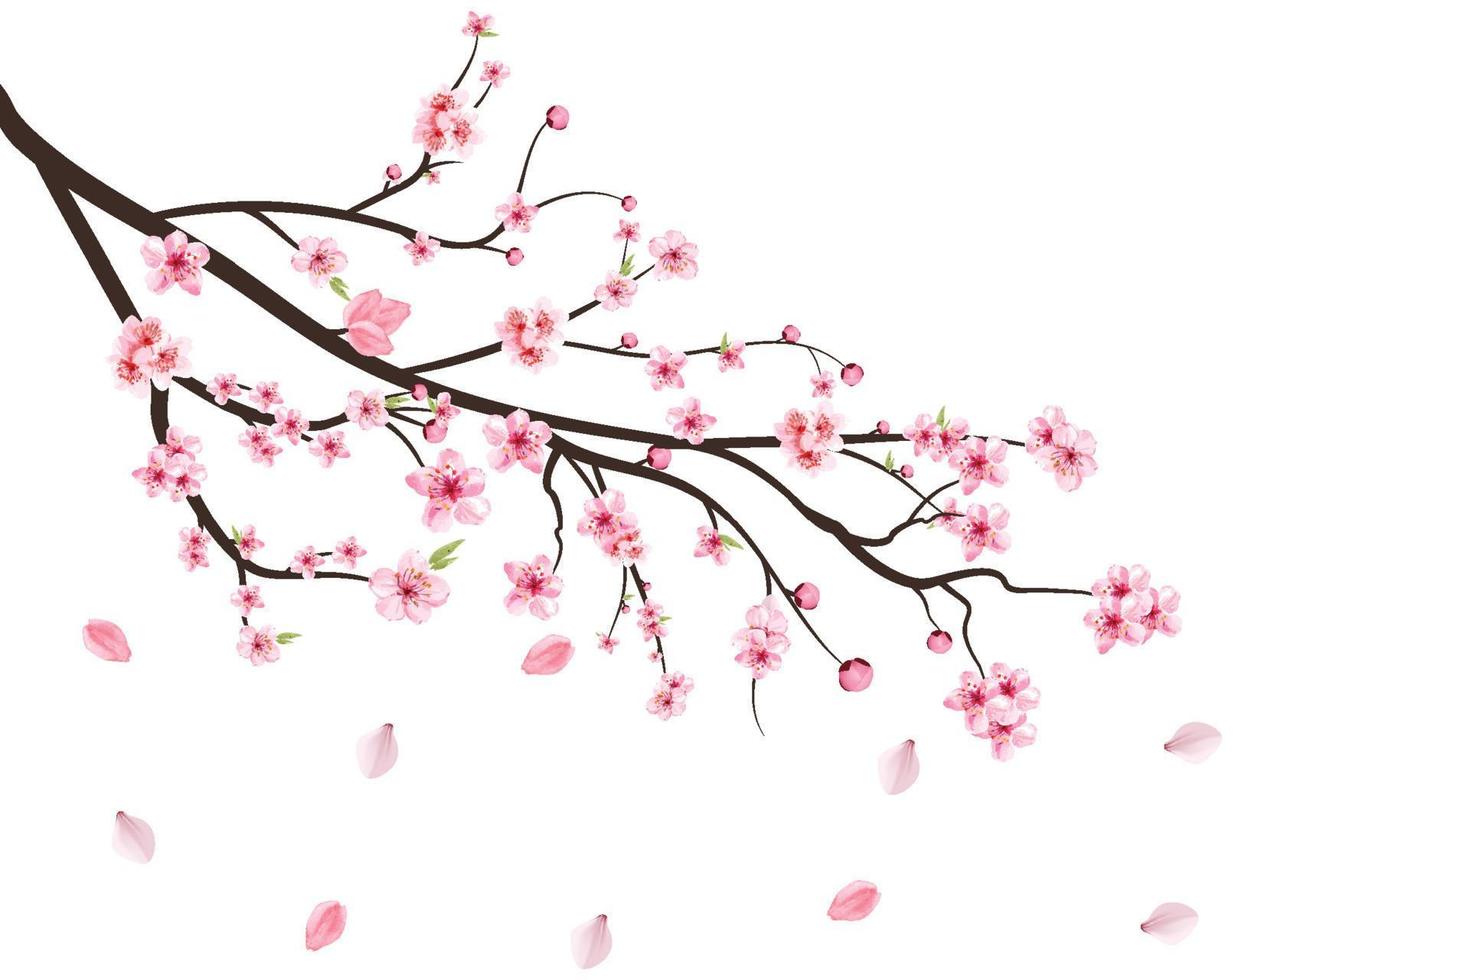 Cherry blossom branch with blooming Sakura. Realistic watercolor cherry flower. Cherry blossom leaves falling. Cherry branch with sakura. Pink Sakura leaf falling. Sakura flower branch illustration. vector